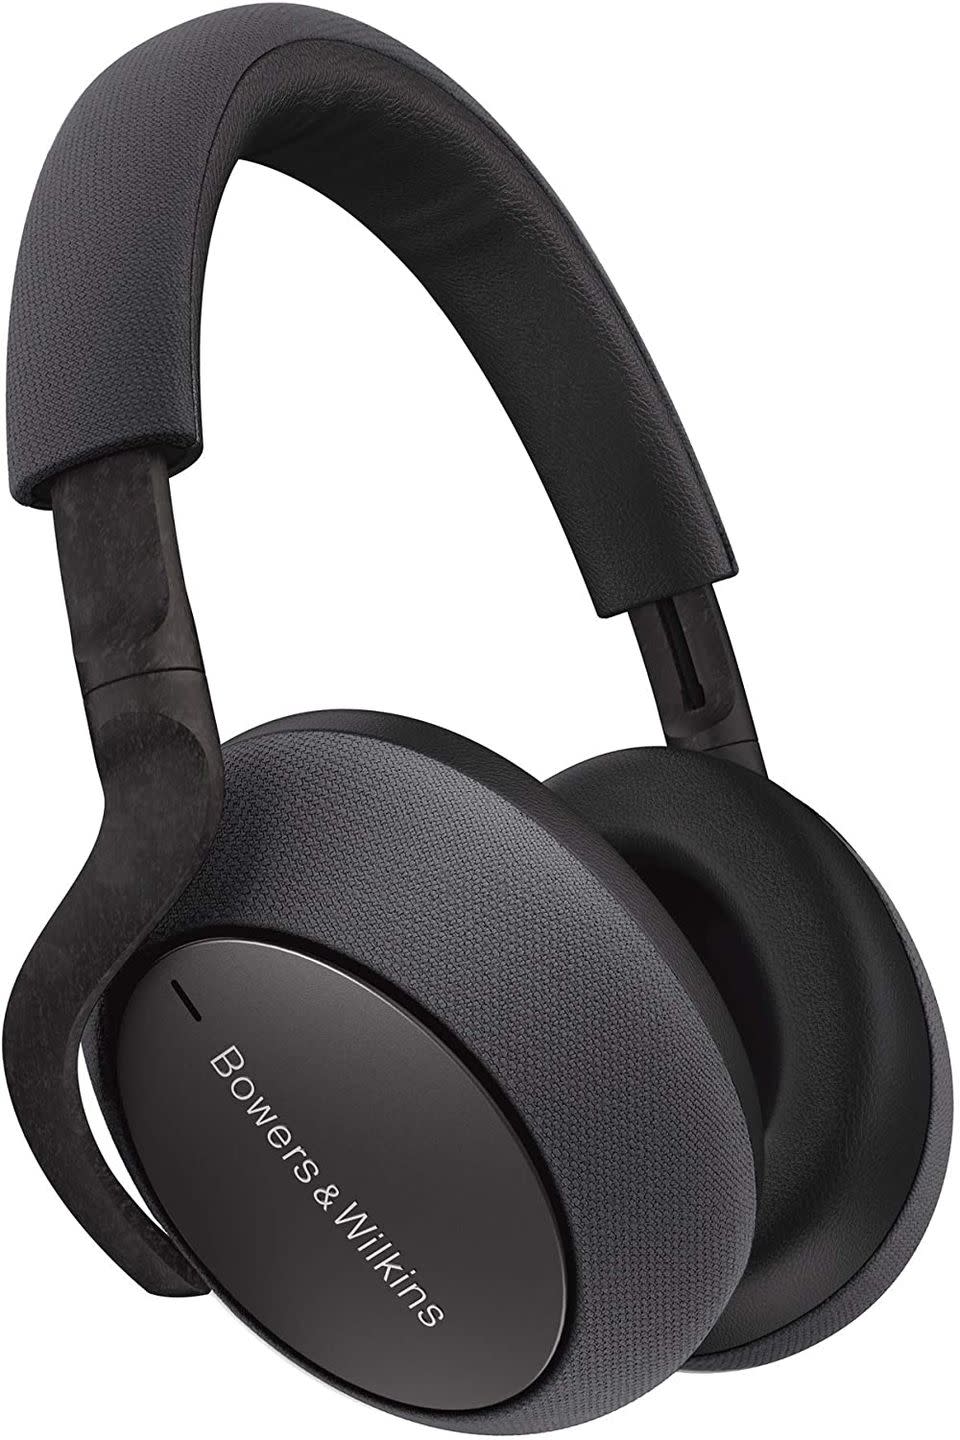 5) Bowers & Wilkins PX7